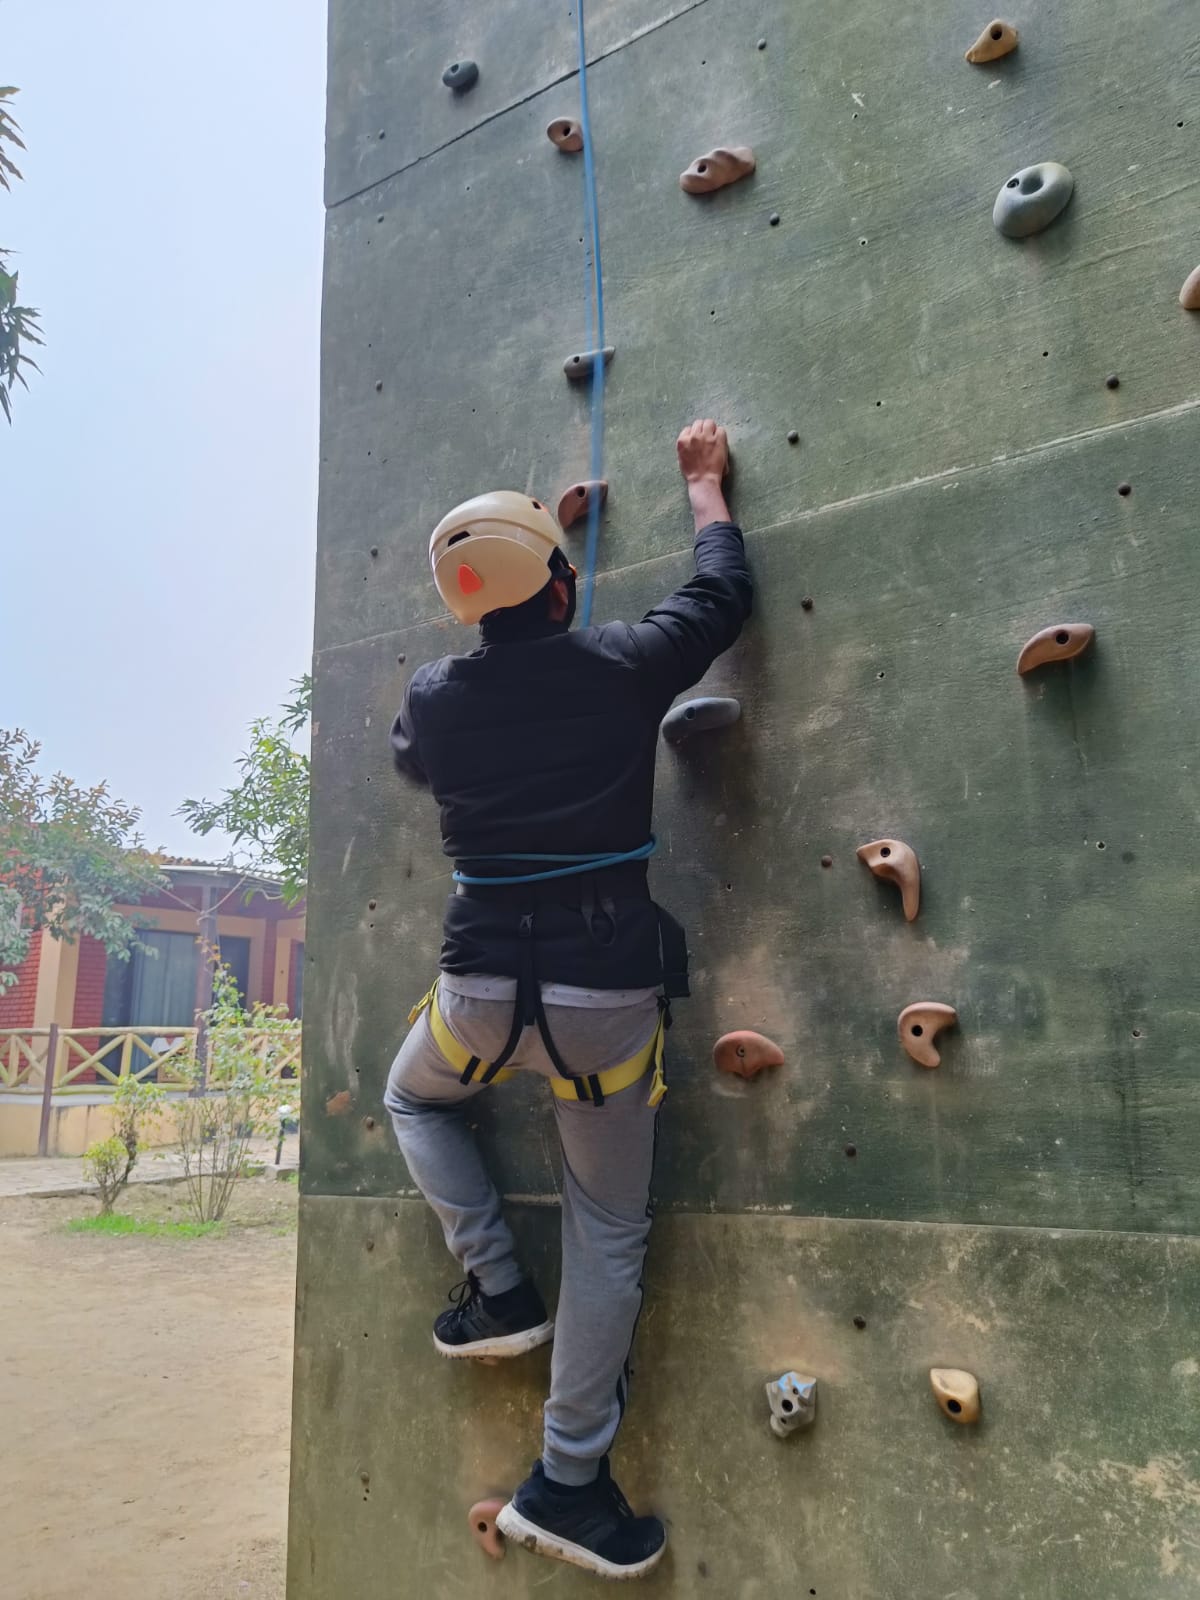 Wall climbing activity for TSAW clients, Drone manufacturer in India, leading the way in the development of advanced air mobility solutions.